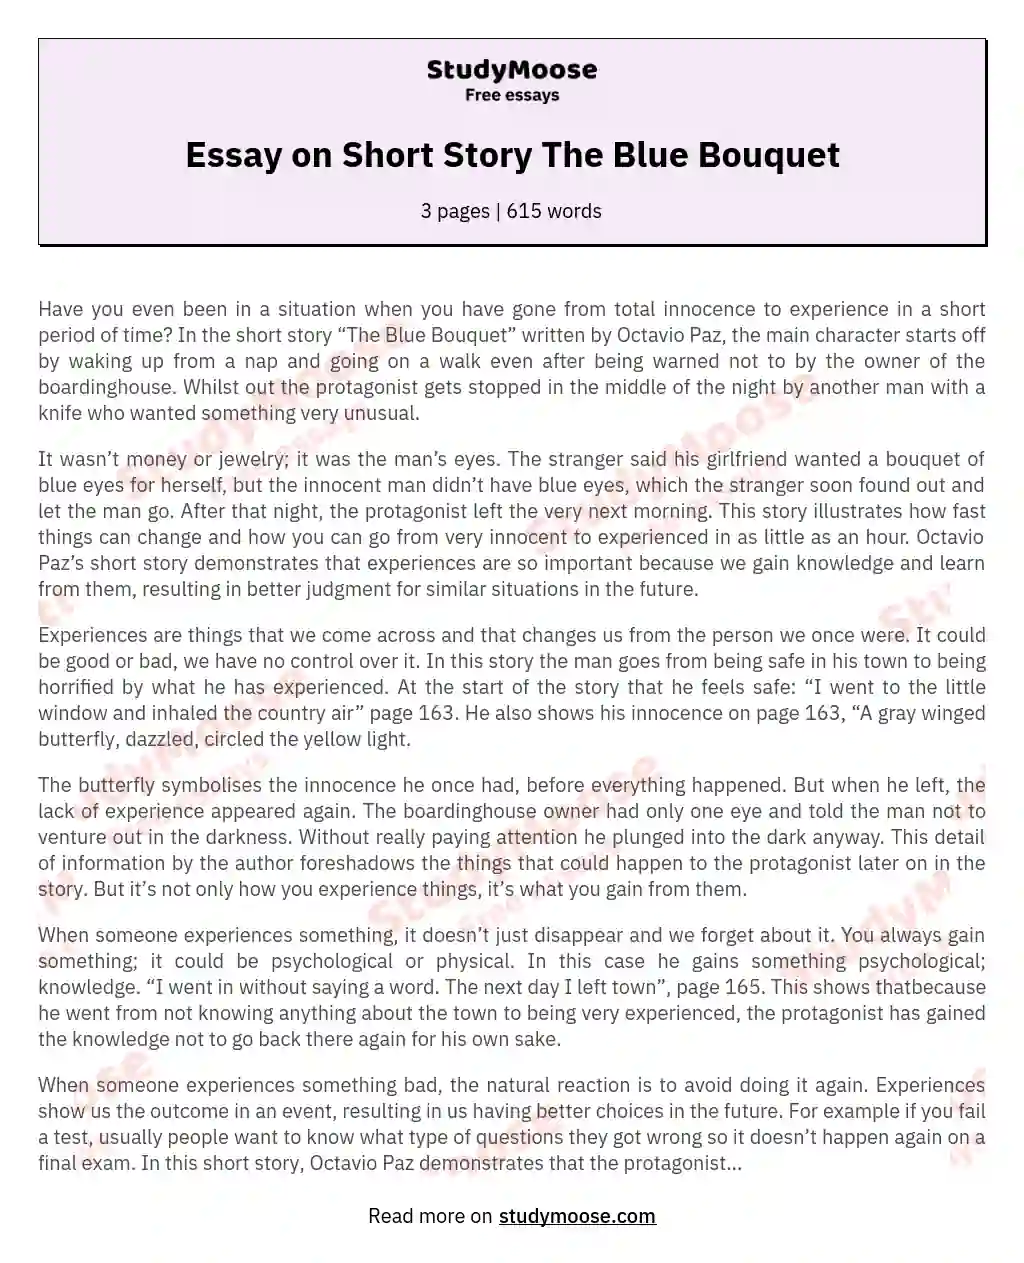 Essay on Short Story The Blue Bouquet